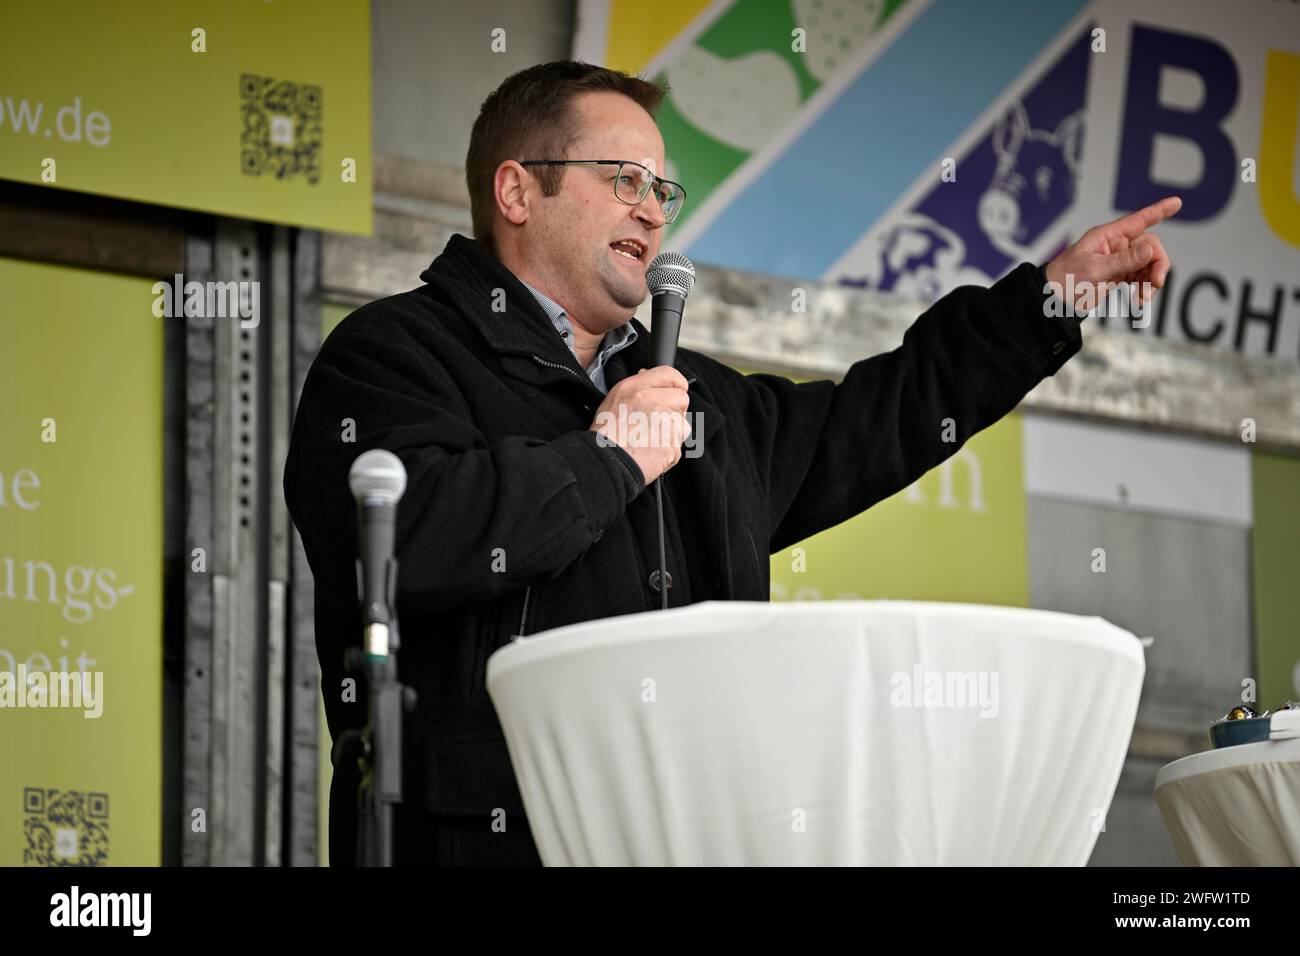 Rally with Juergen Maurer, Chairman of the Schwaebisch Hall-Hohenlohe-Rems LBV farmers' association, microphone, gesture, farmers' protest Stock Photo